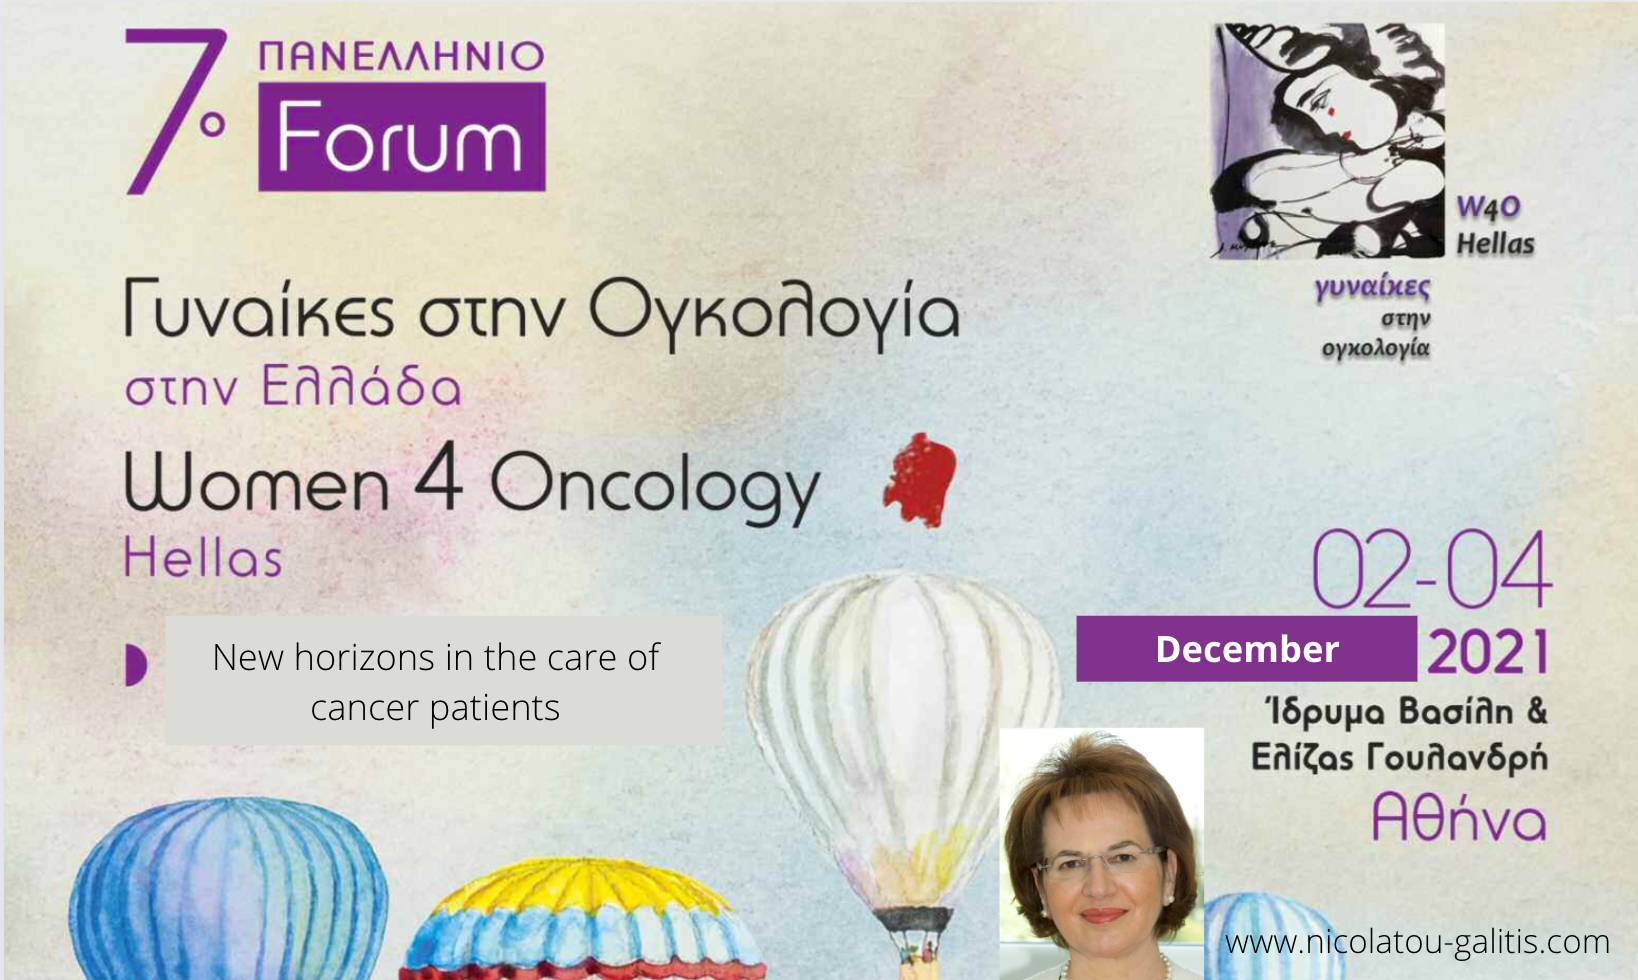 New Horizons in the care of patients with cancer